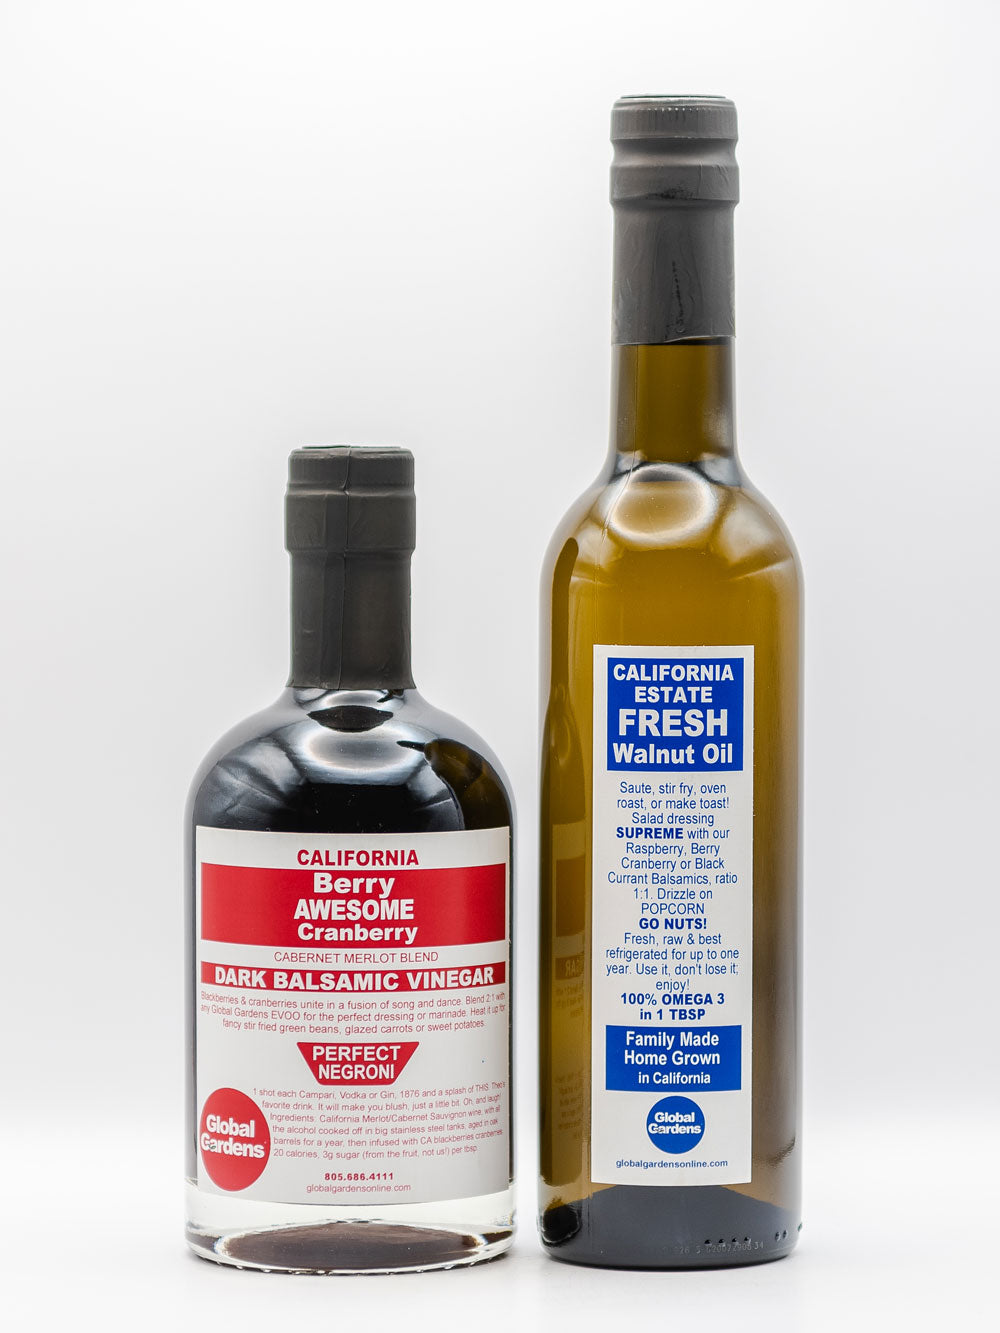 Omega 3 Power Gift Duo - Roasted Walnut Oil & Berry Cranberry OR Black Currant Balsamic